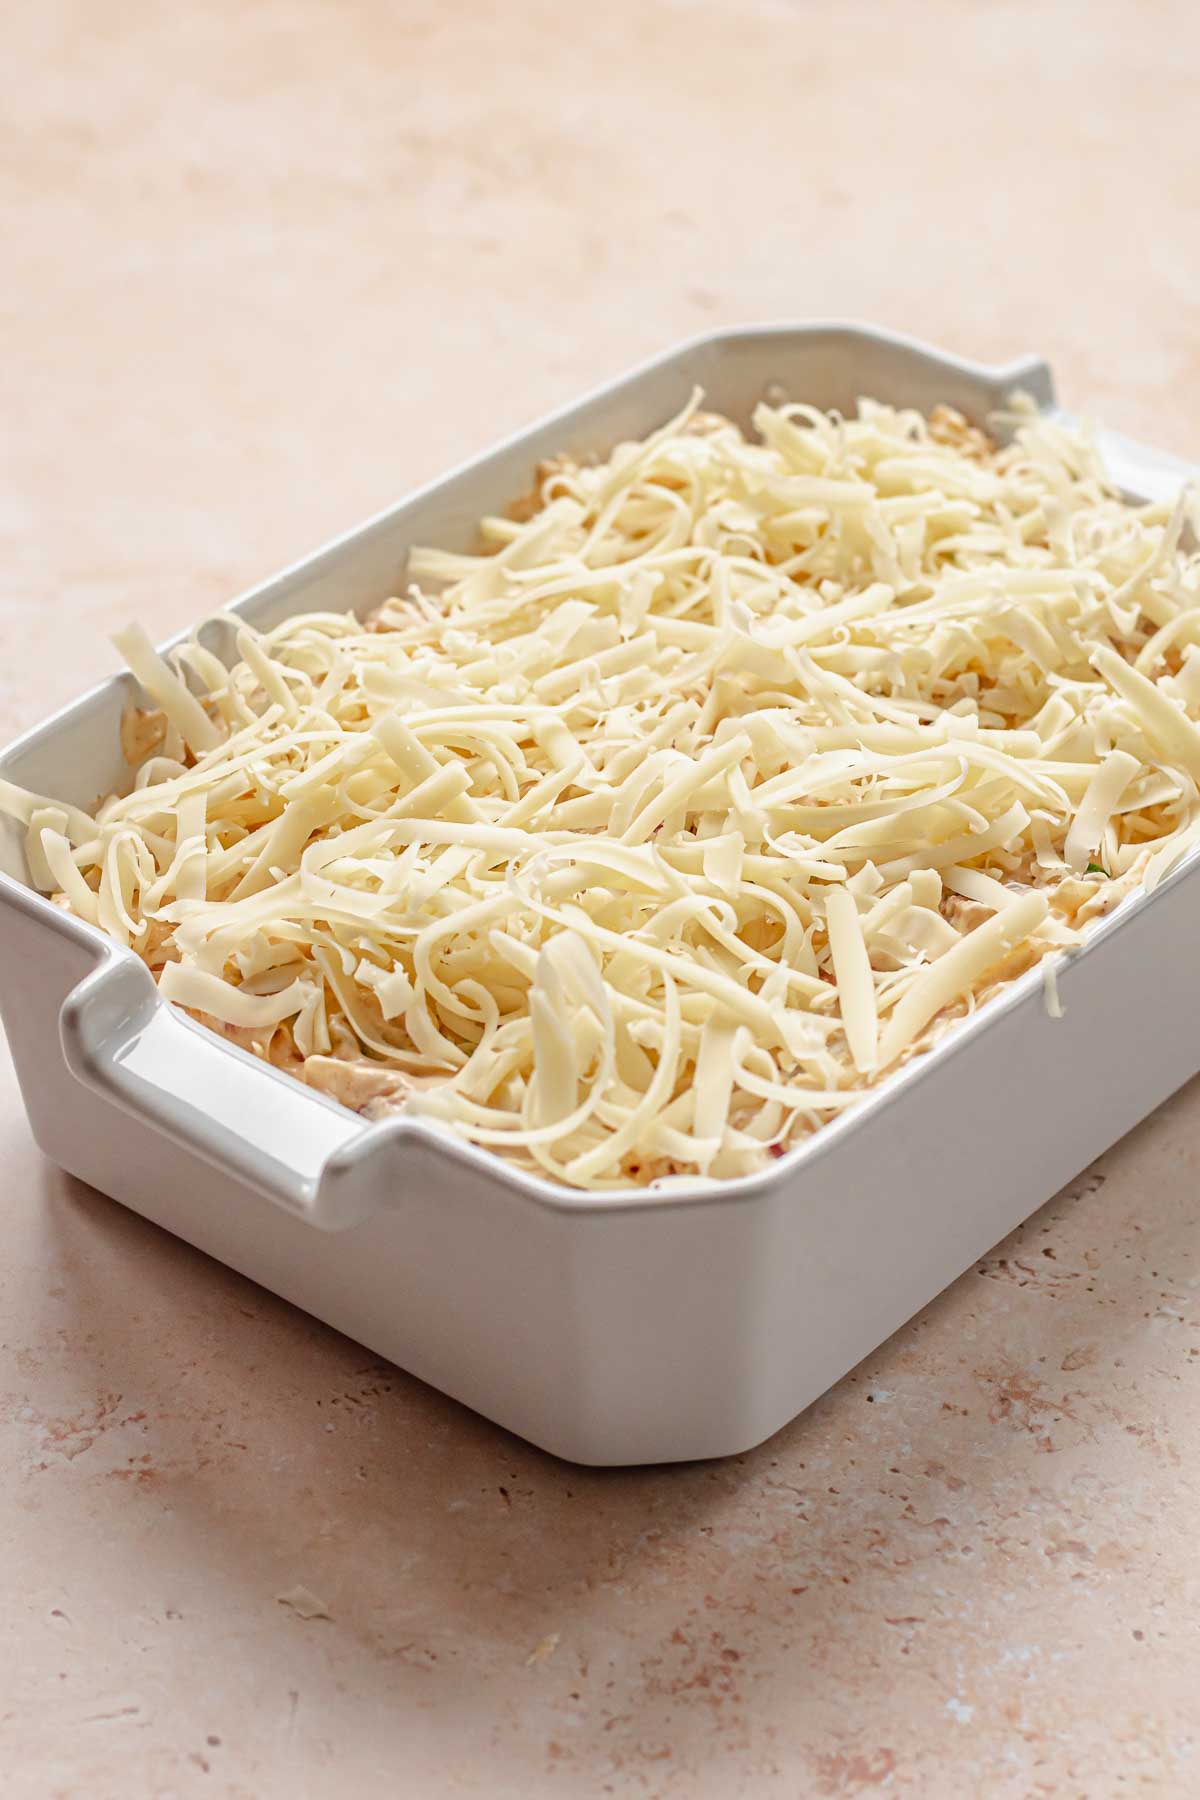 Pre-baked dip in a dish with shredded cheese on top.